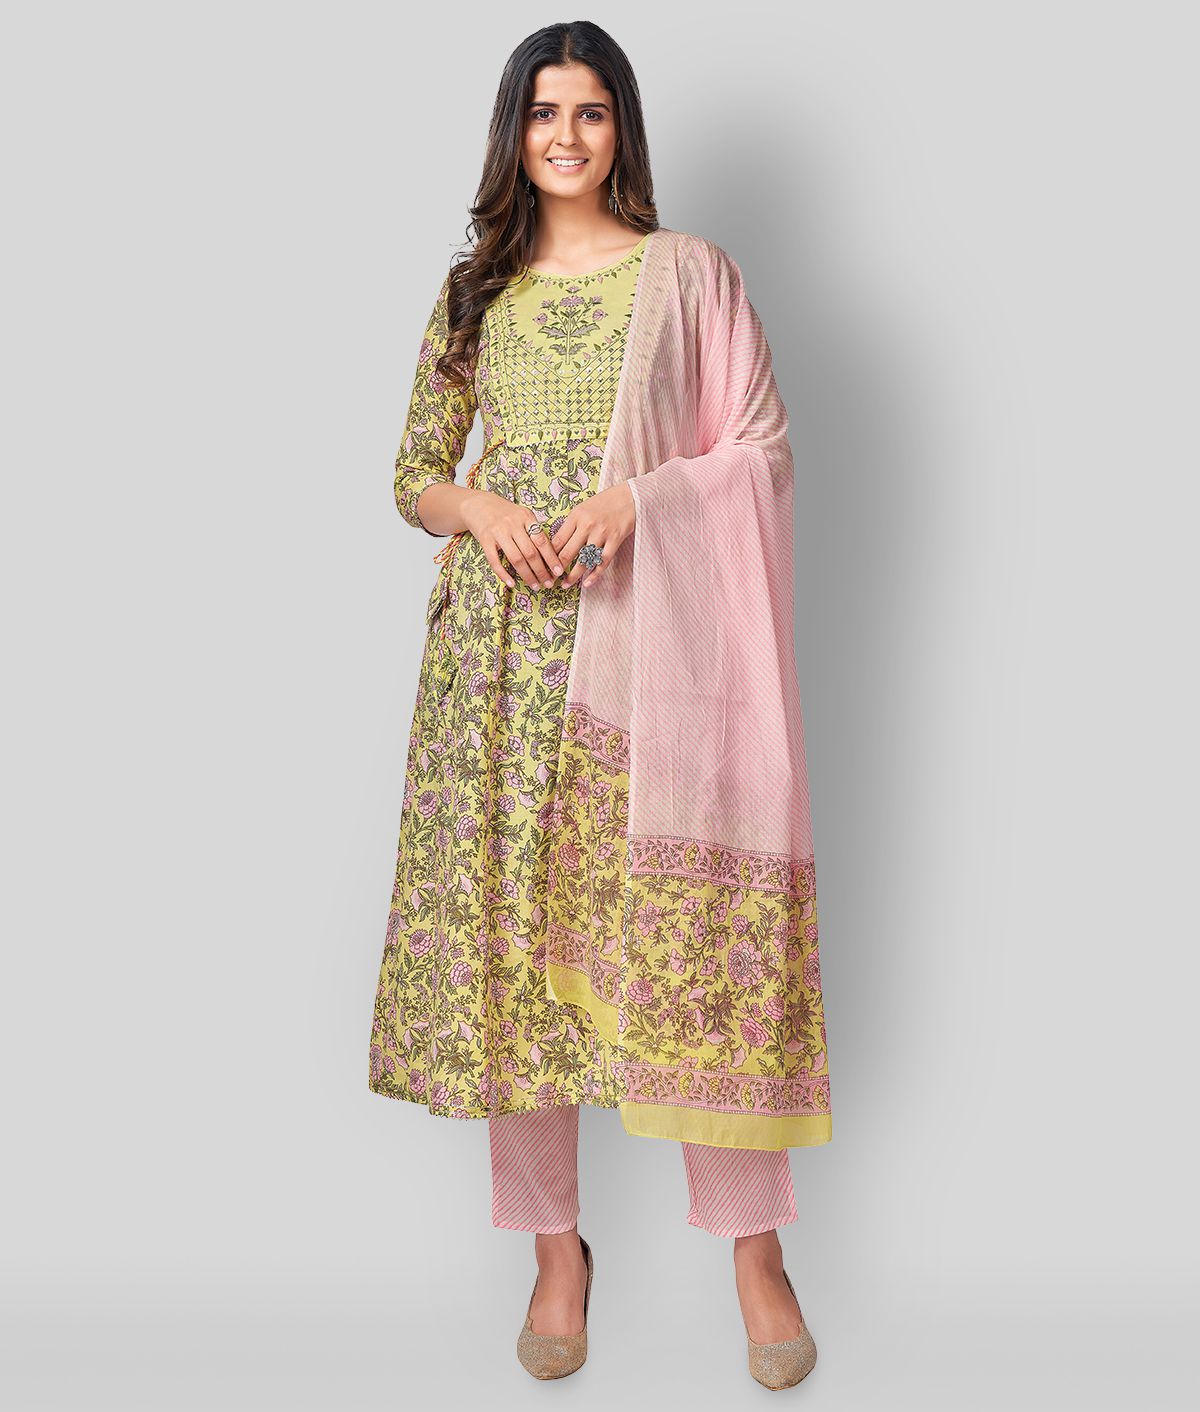     			Vbuyz - Yellow Cotton Women's Stitched Salwar Suit ( Pack of 1 )